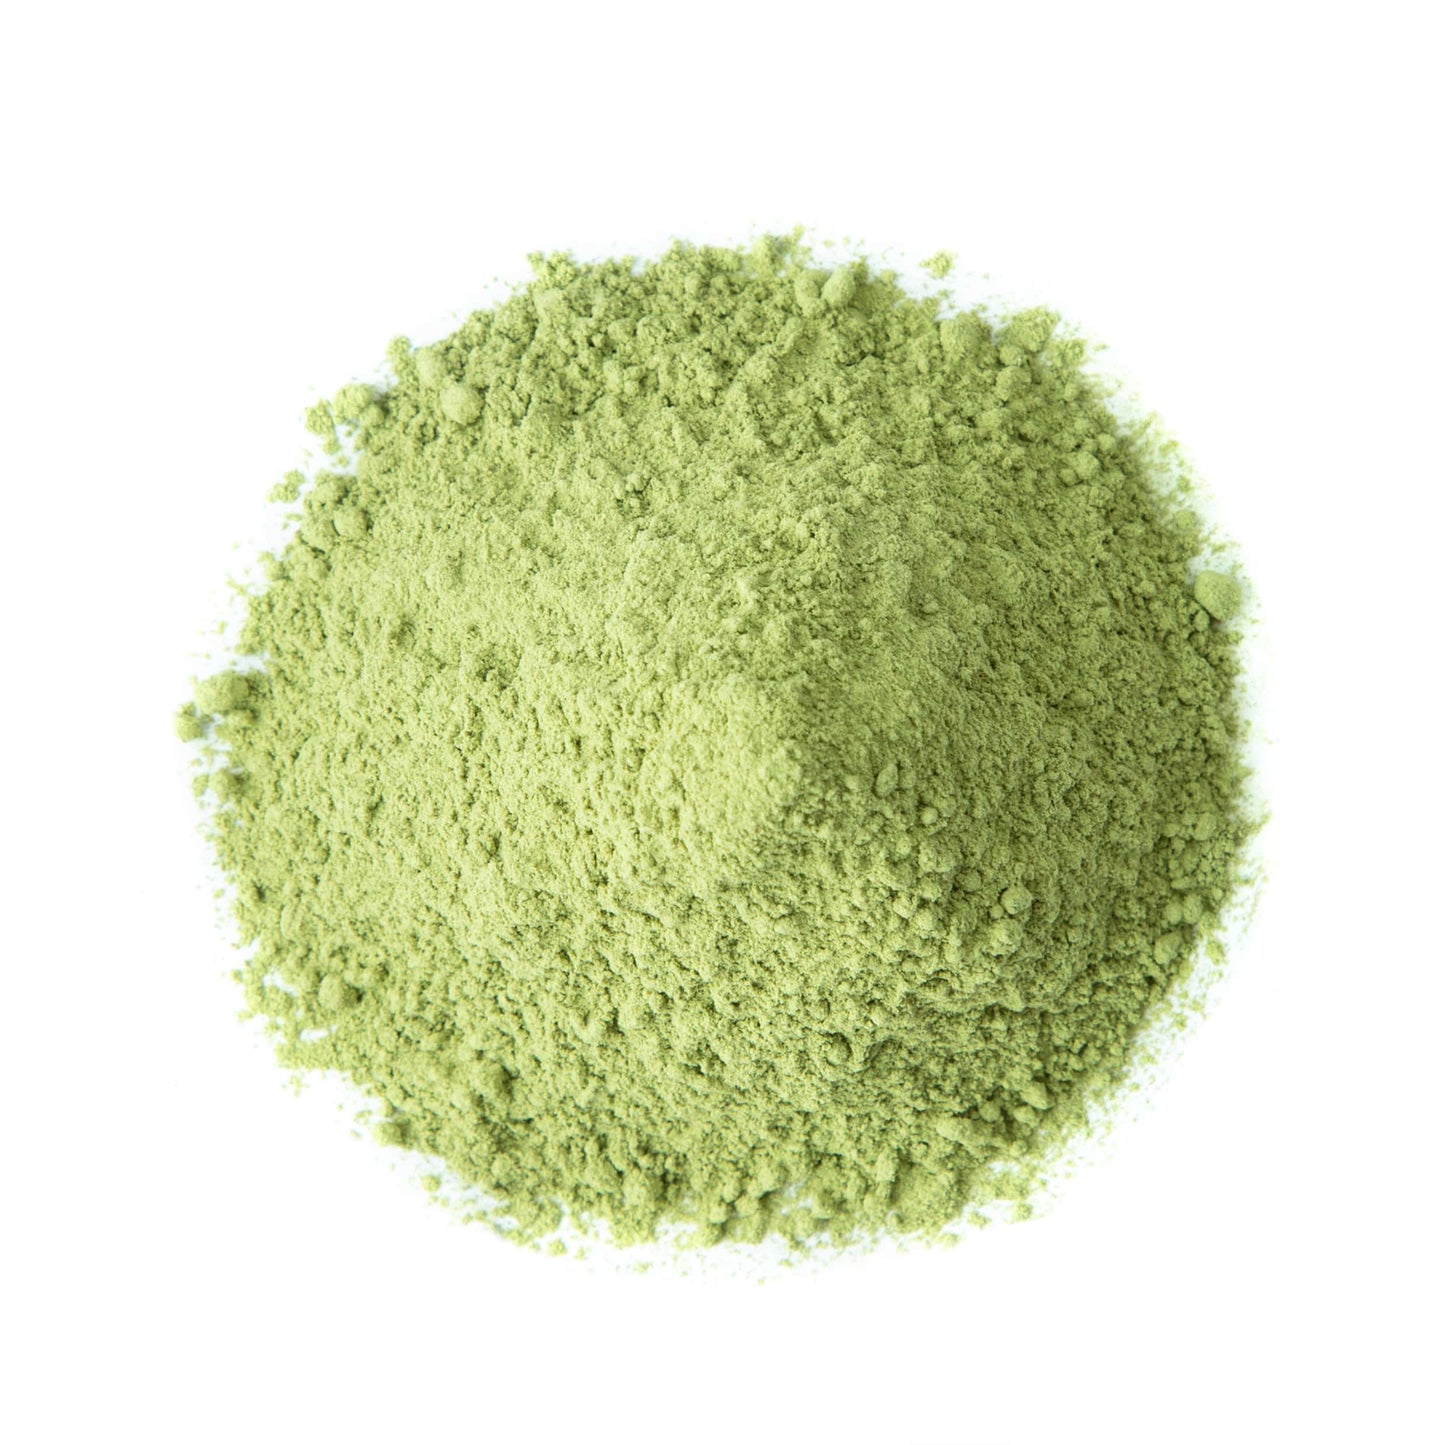 Kale Powder, X Pounds - Made from Raw Dried Whole Leaves, Kosher, Vegan, Bulk, Great for Baking, Juices, Smoothies, Shakes, Теа, and Instant Breakfast Drinks. Good Source of Vitamin C - by Food to Live